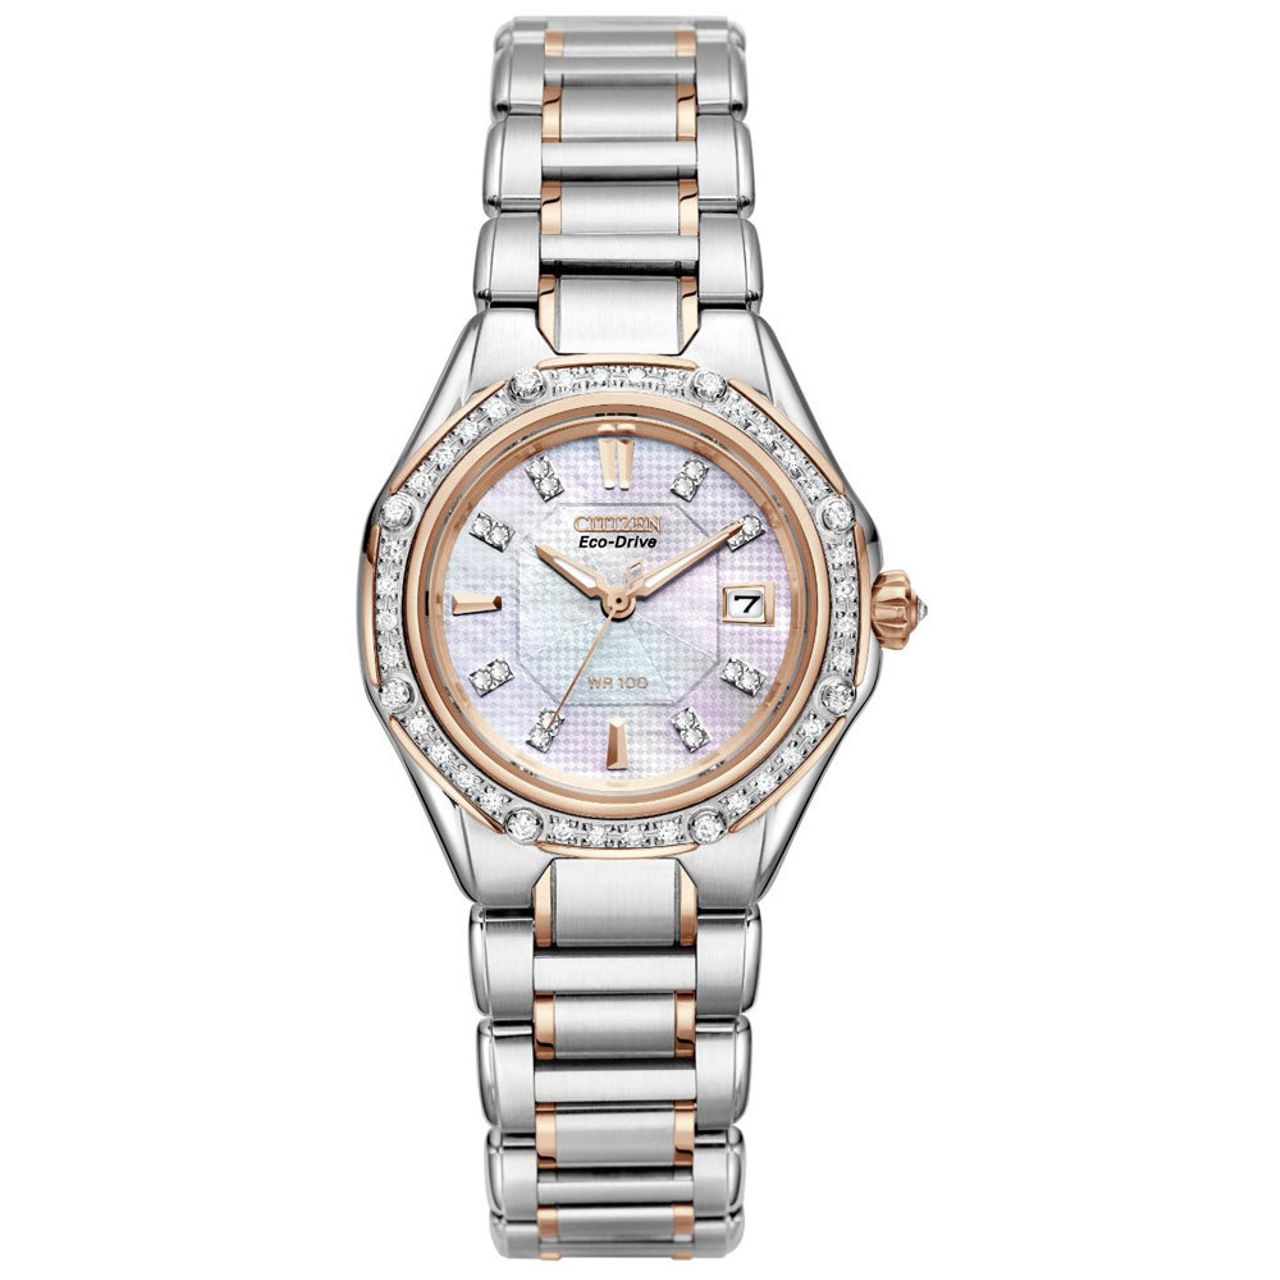 Citizen EW2096-57D Womens Mop Dial Watch with Stainless Steel Strap